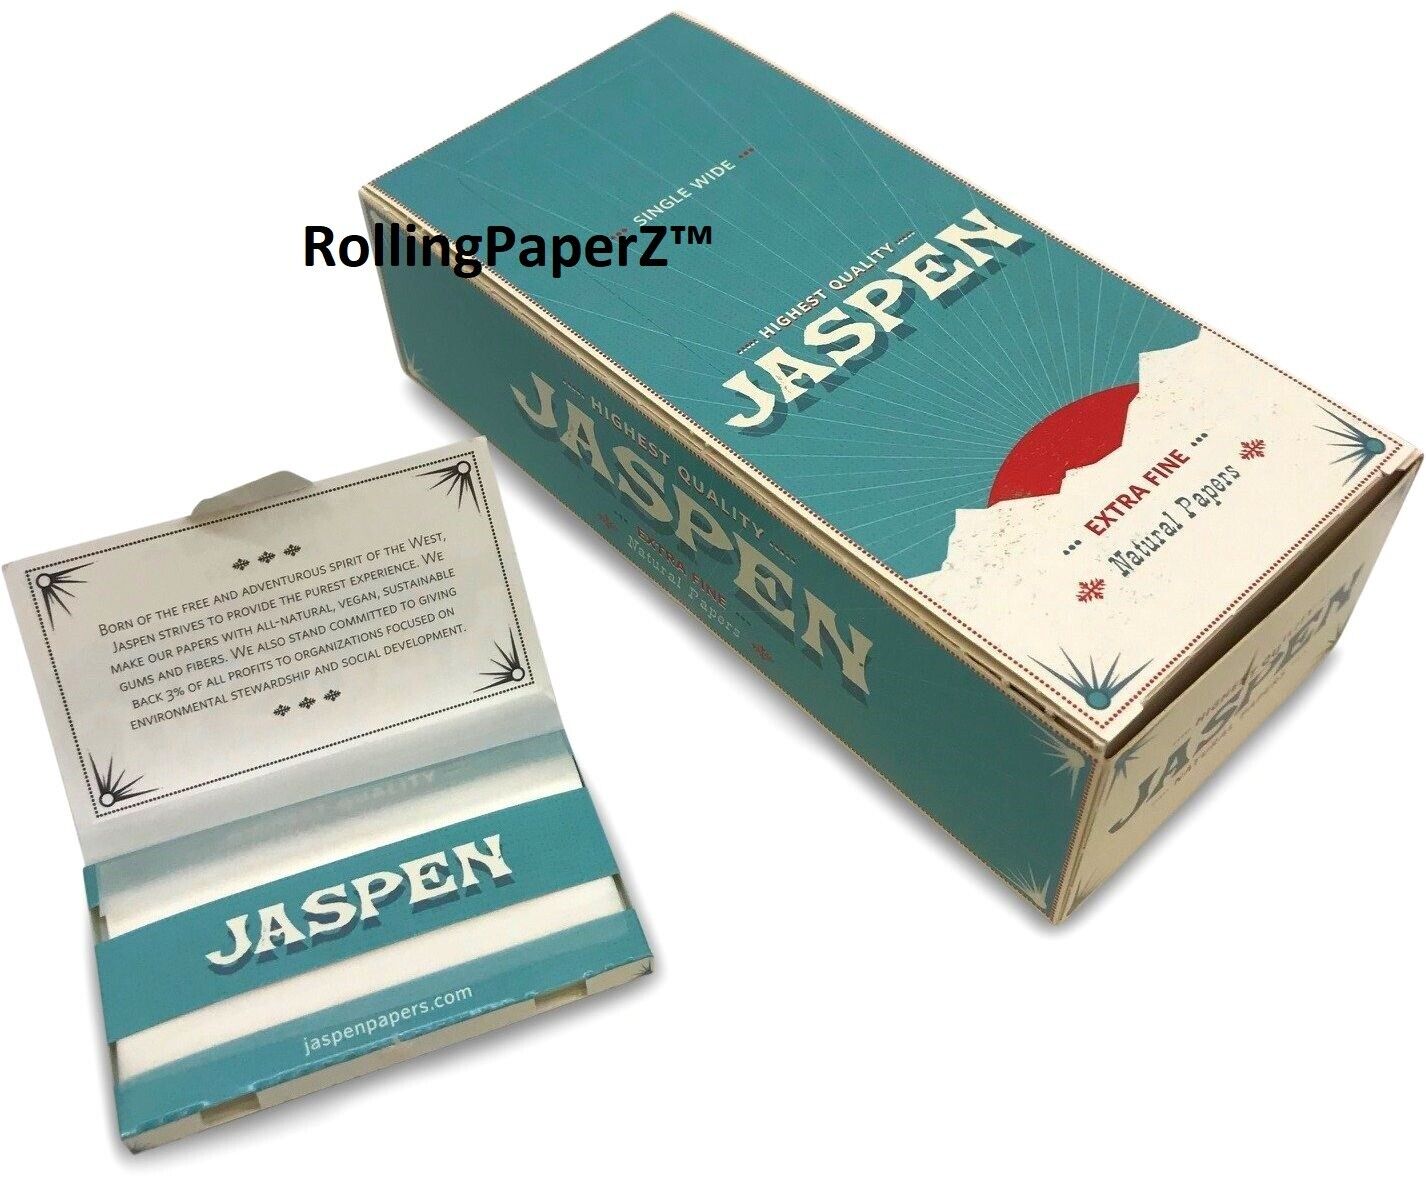 BOX of JASPEN Single Wide Cigarette Rolling Papers - 25 Packs/ 100 leaves each 